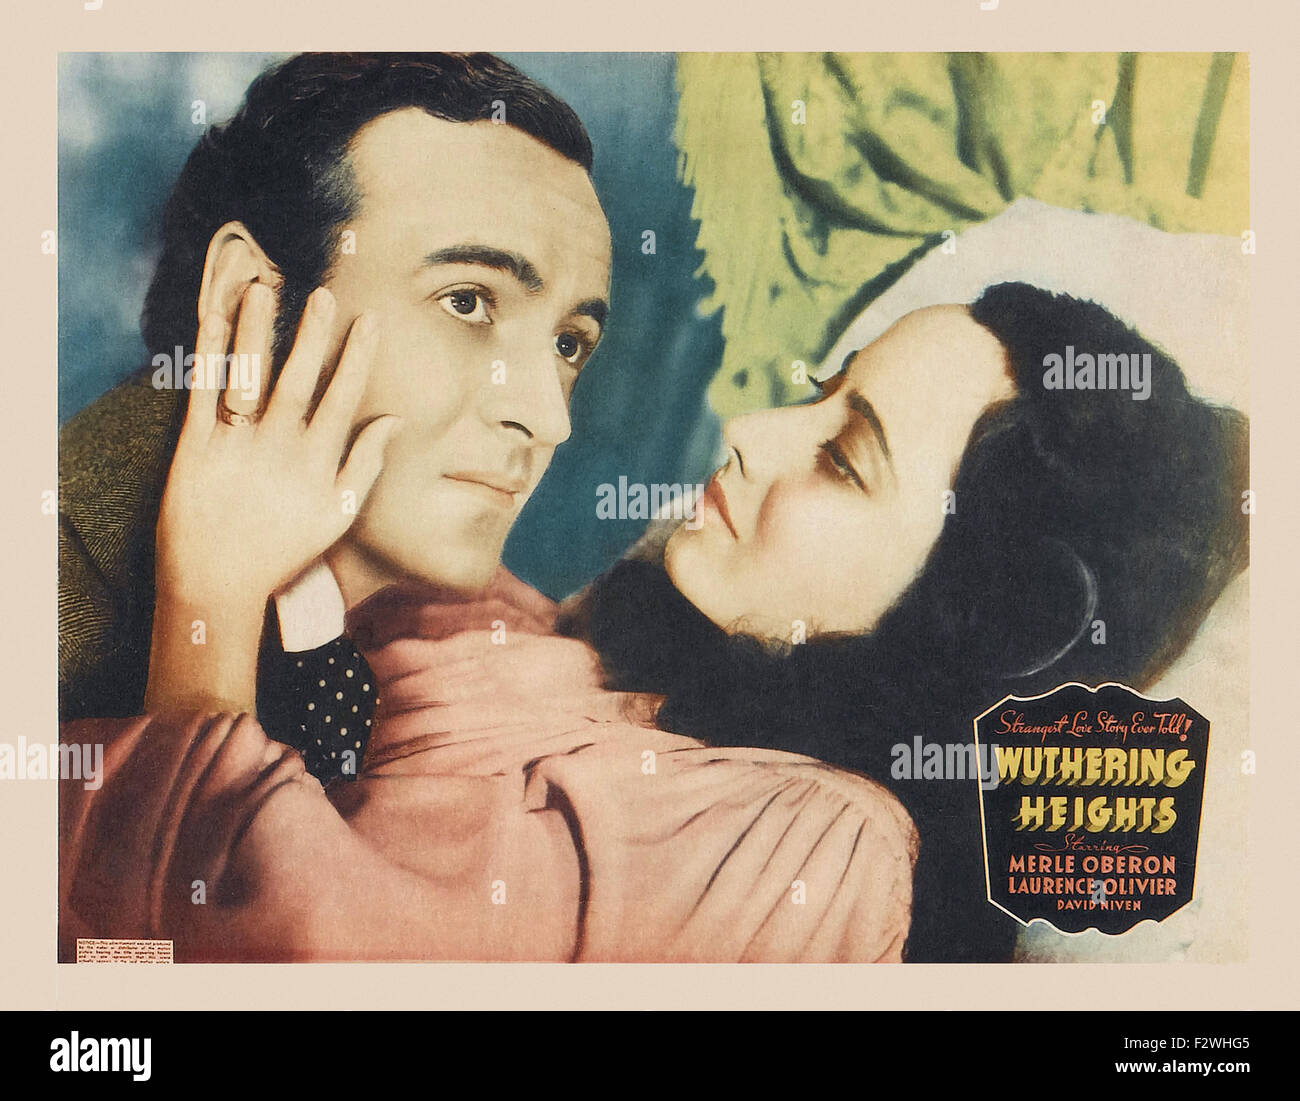 Wuthering Heights (1939) - Movie Poster Stock Photo - Alamy